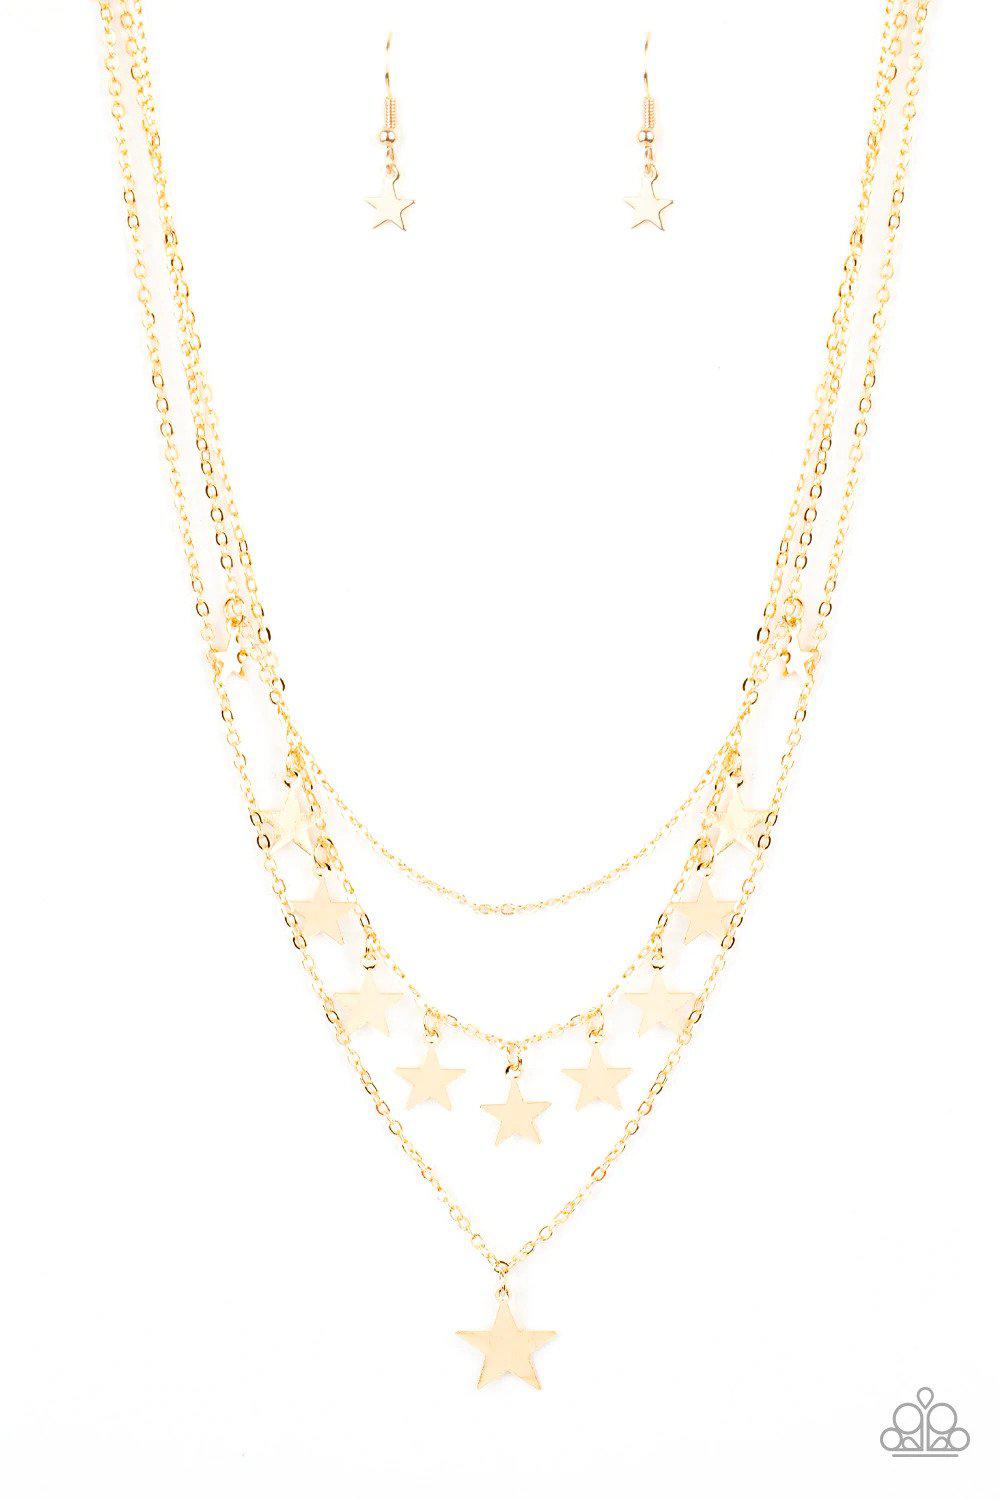 Americana Girl Gold Necklace - Paparazzi Accessories- lightbox - CarasShop.com - $5 Jewelry by Cara Jewels